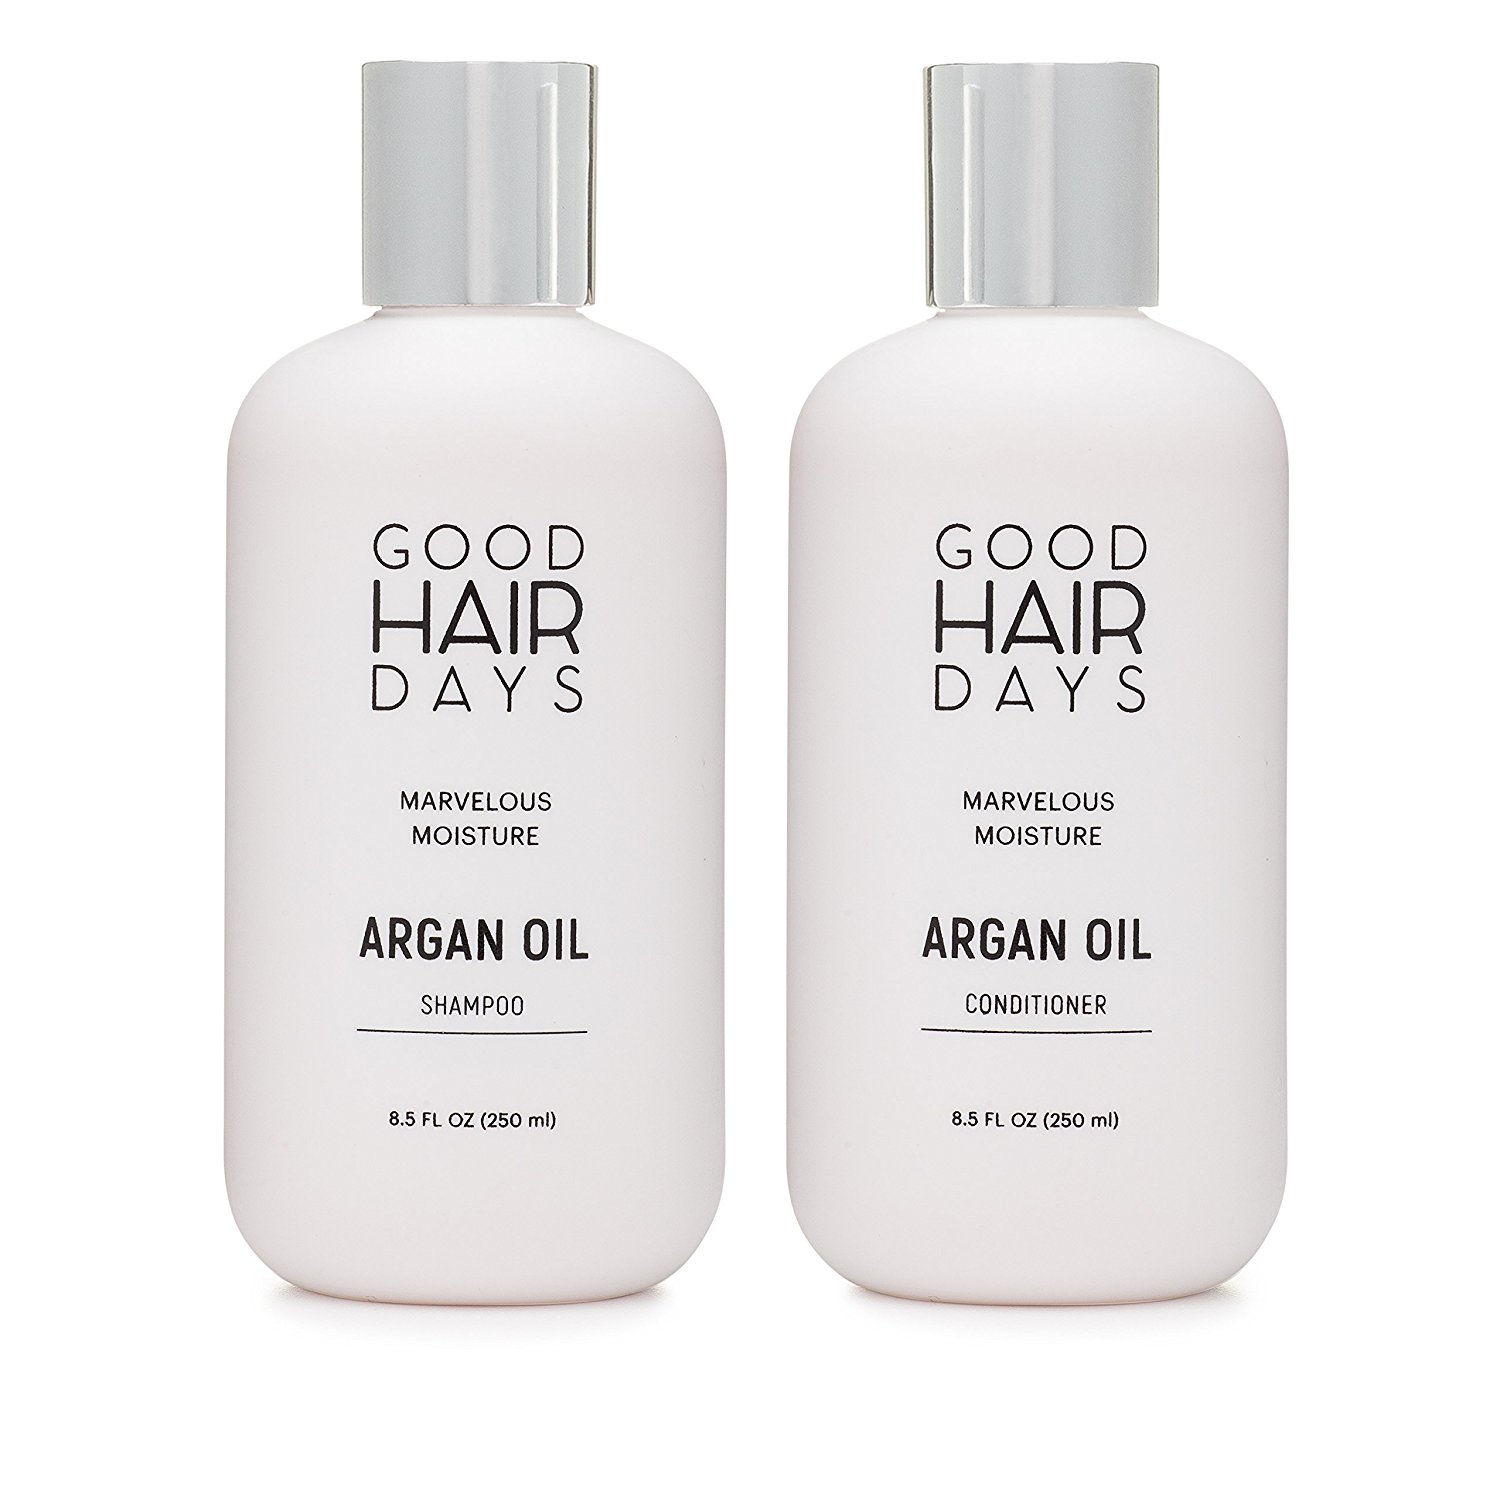 Shampoo & Conditioner Set, Featuring Moroccan Argan Oil, Good For Hair Extensions, Shampoo & Conditioner for Keratin Treated Hair, Volumizing & Moisturizing, Gentle on Curly & Color Treated Hair